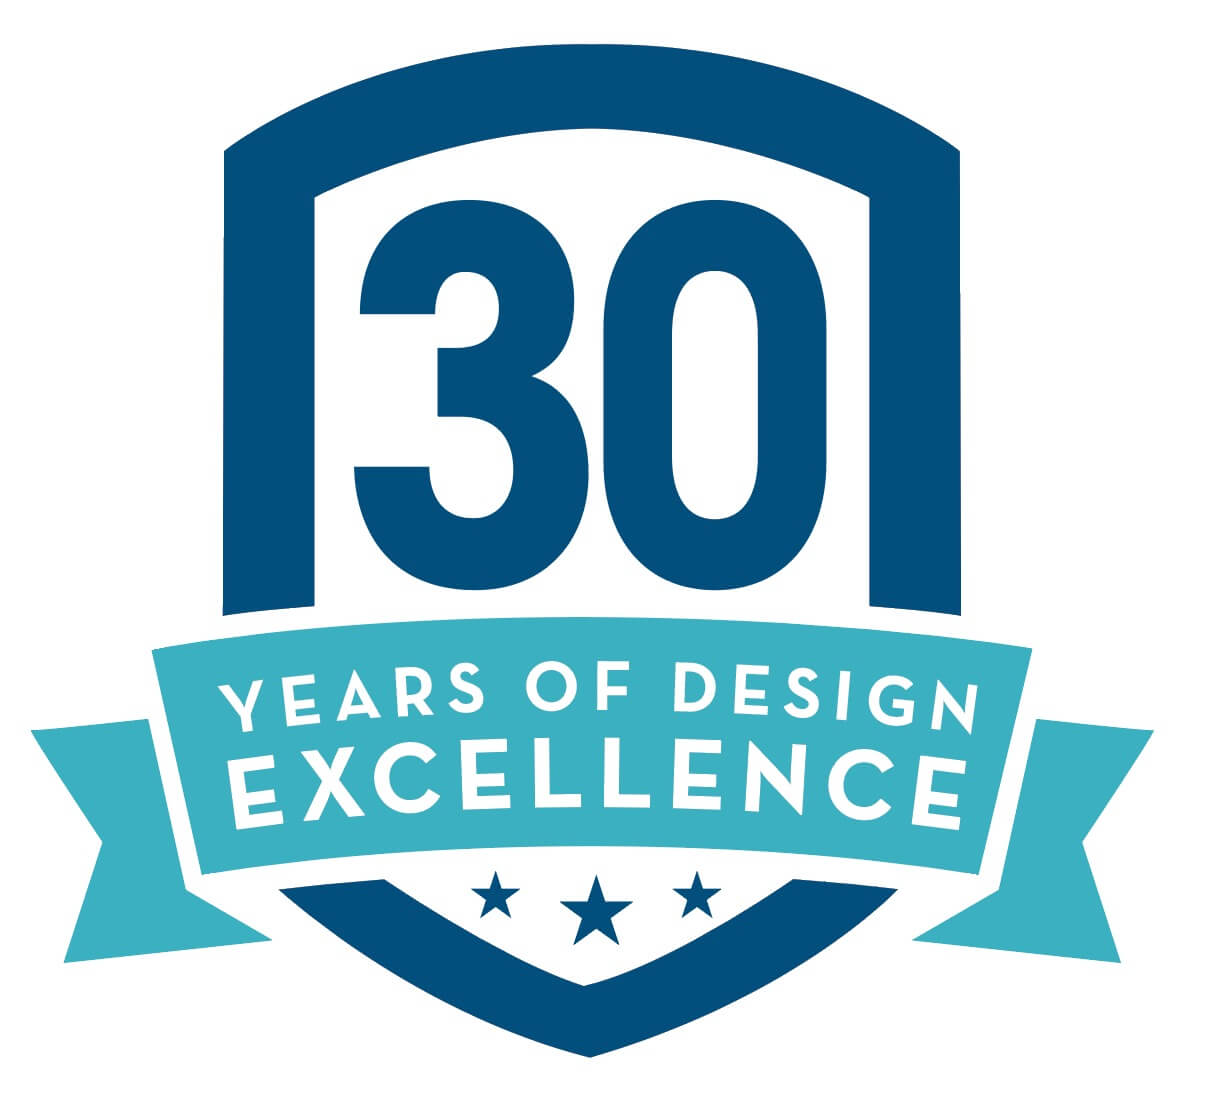 30 Years of Design Excellence